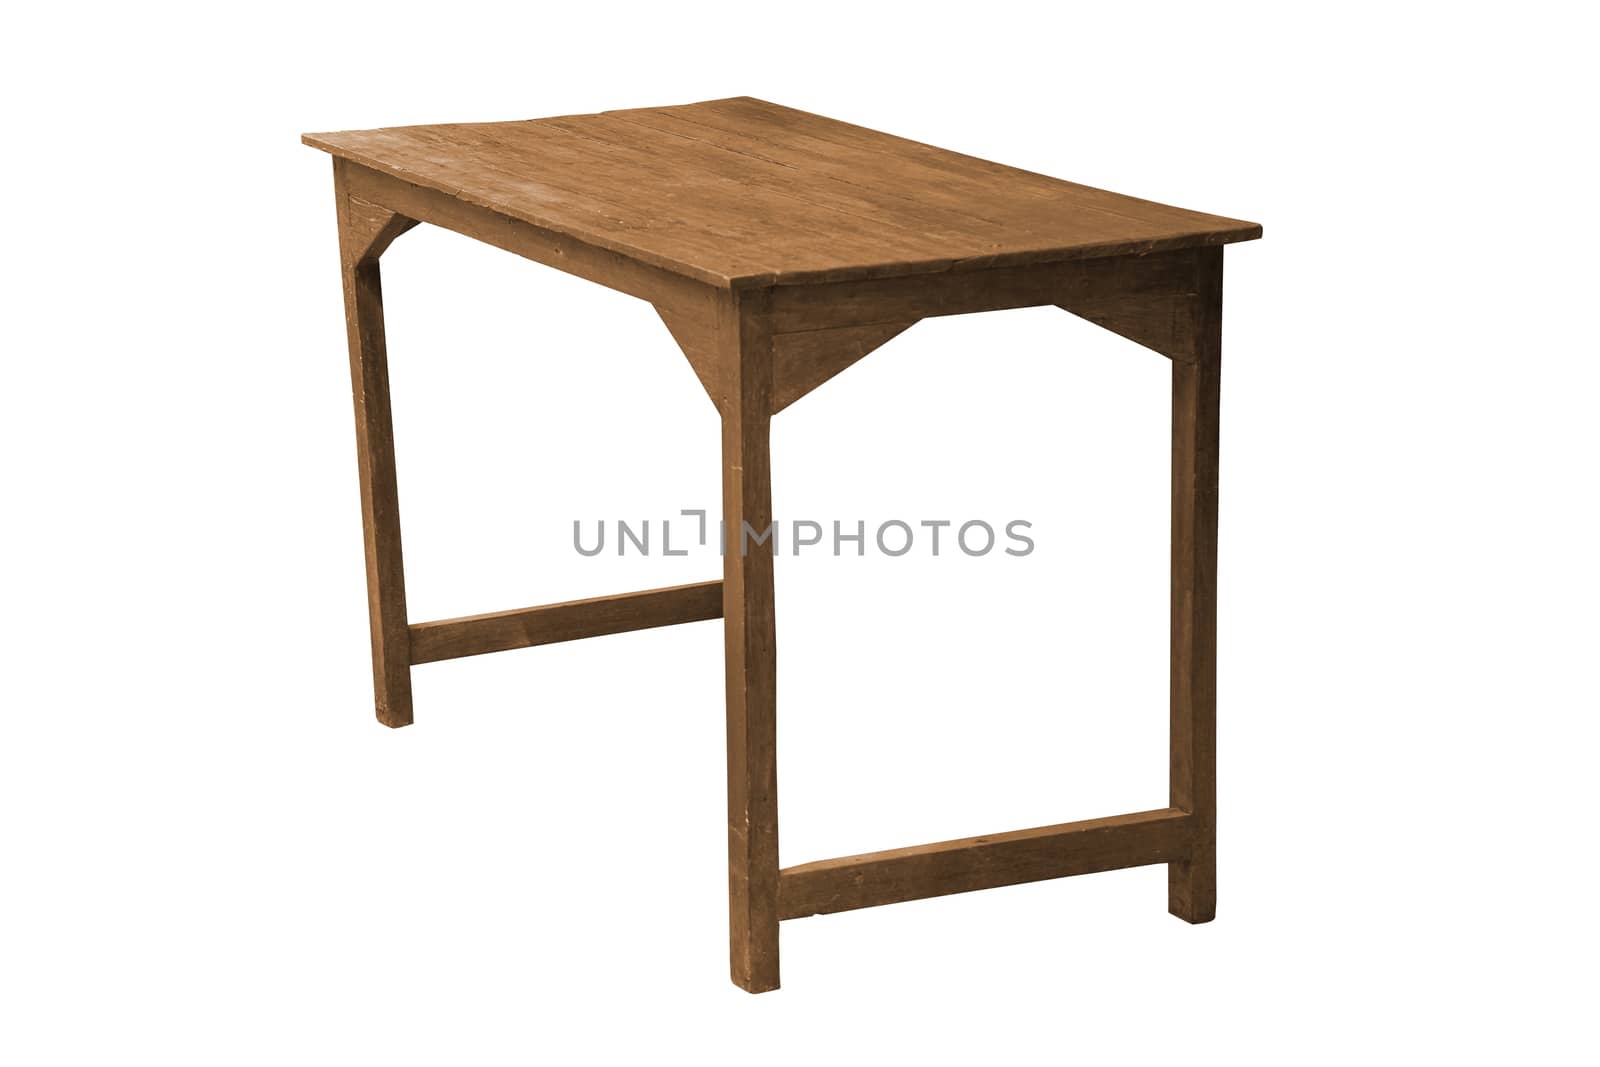 Old wooden table isolated on white background, work with clipping path.